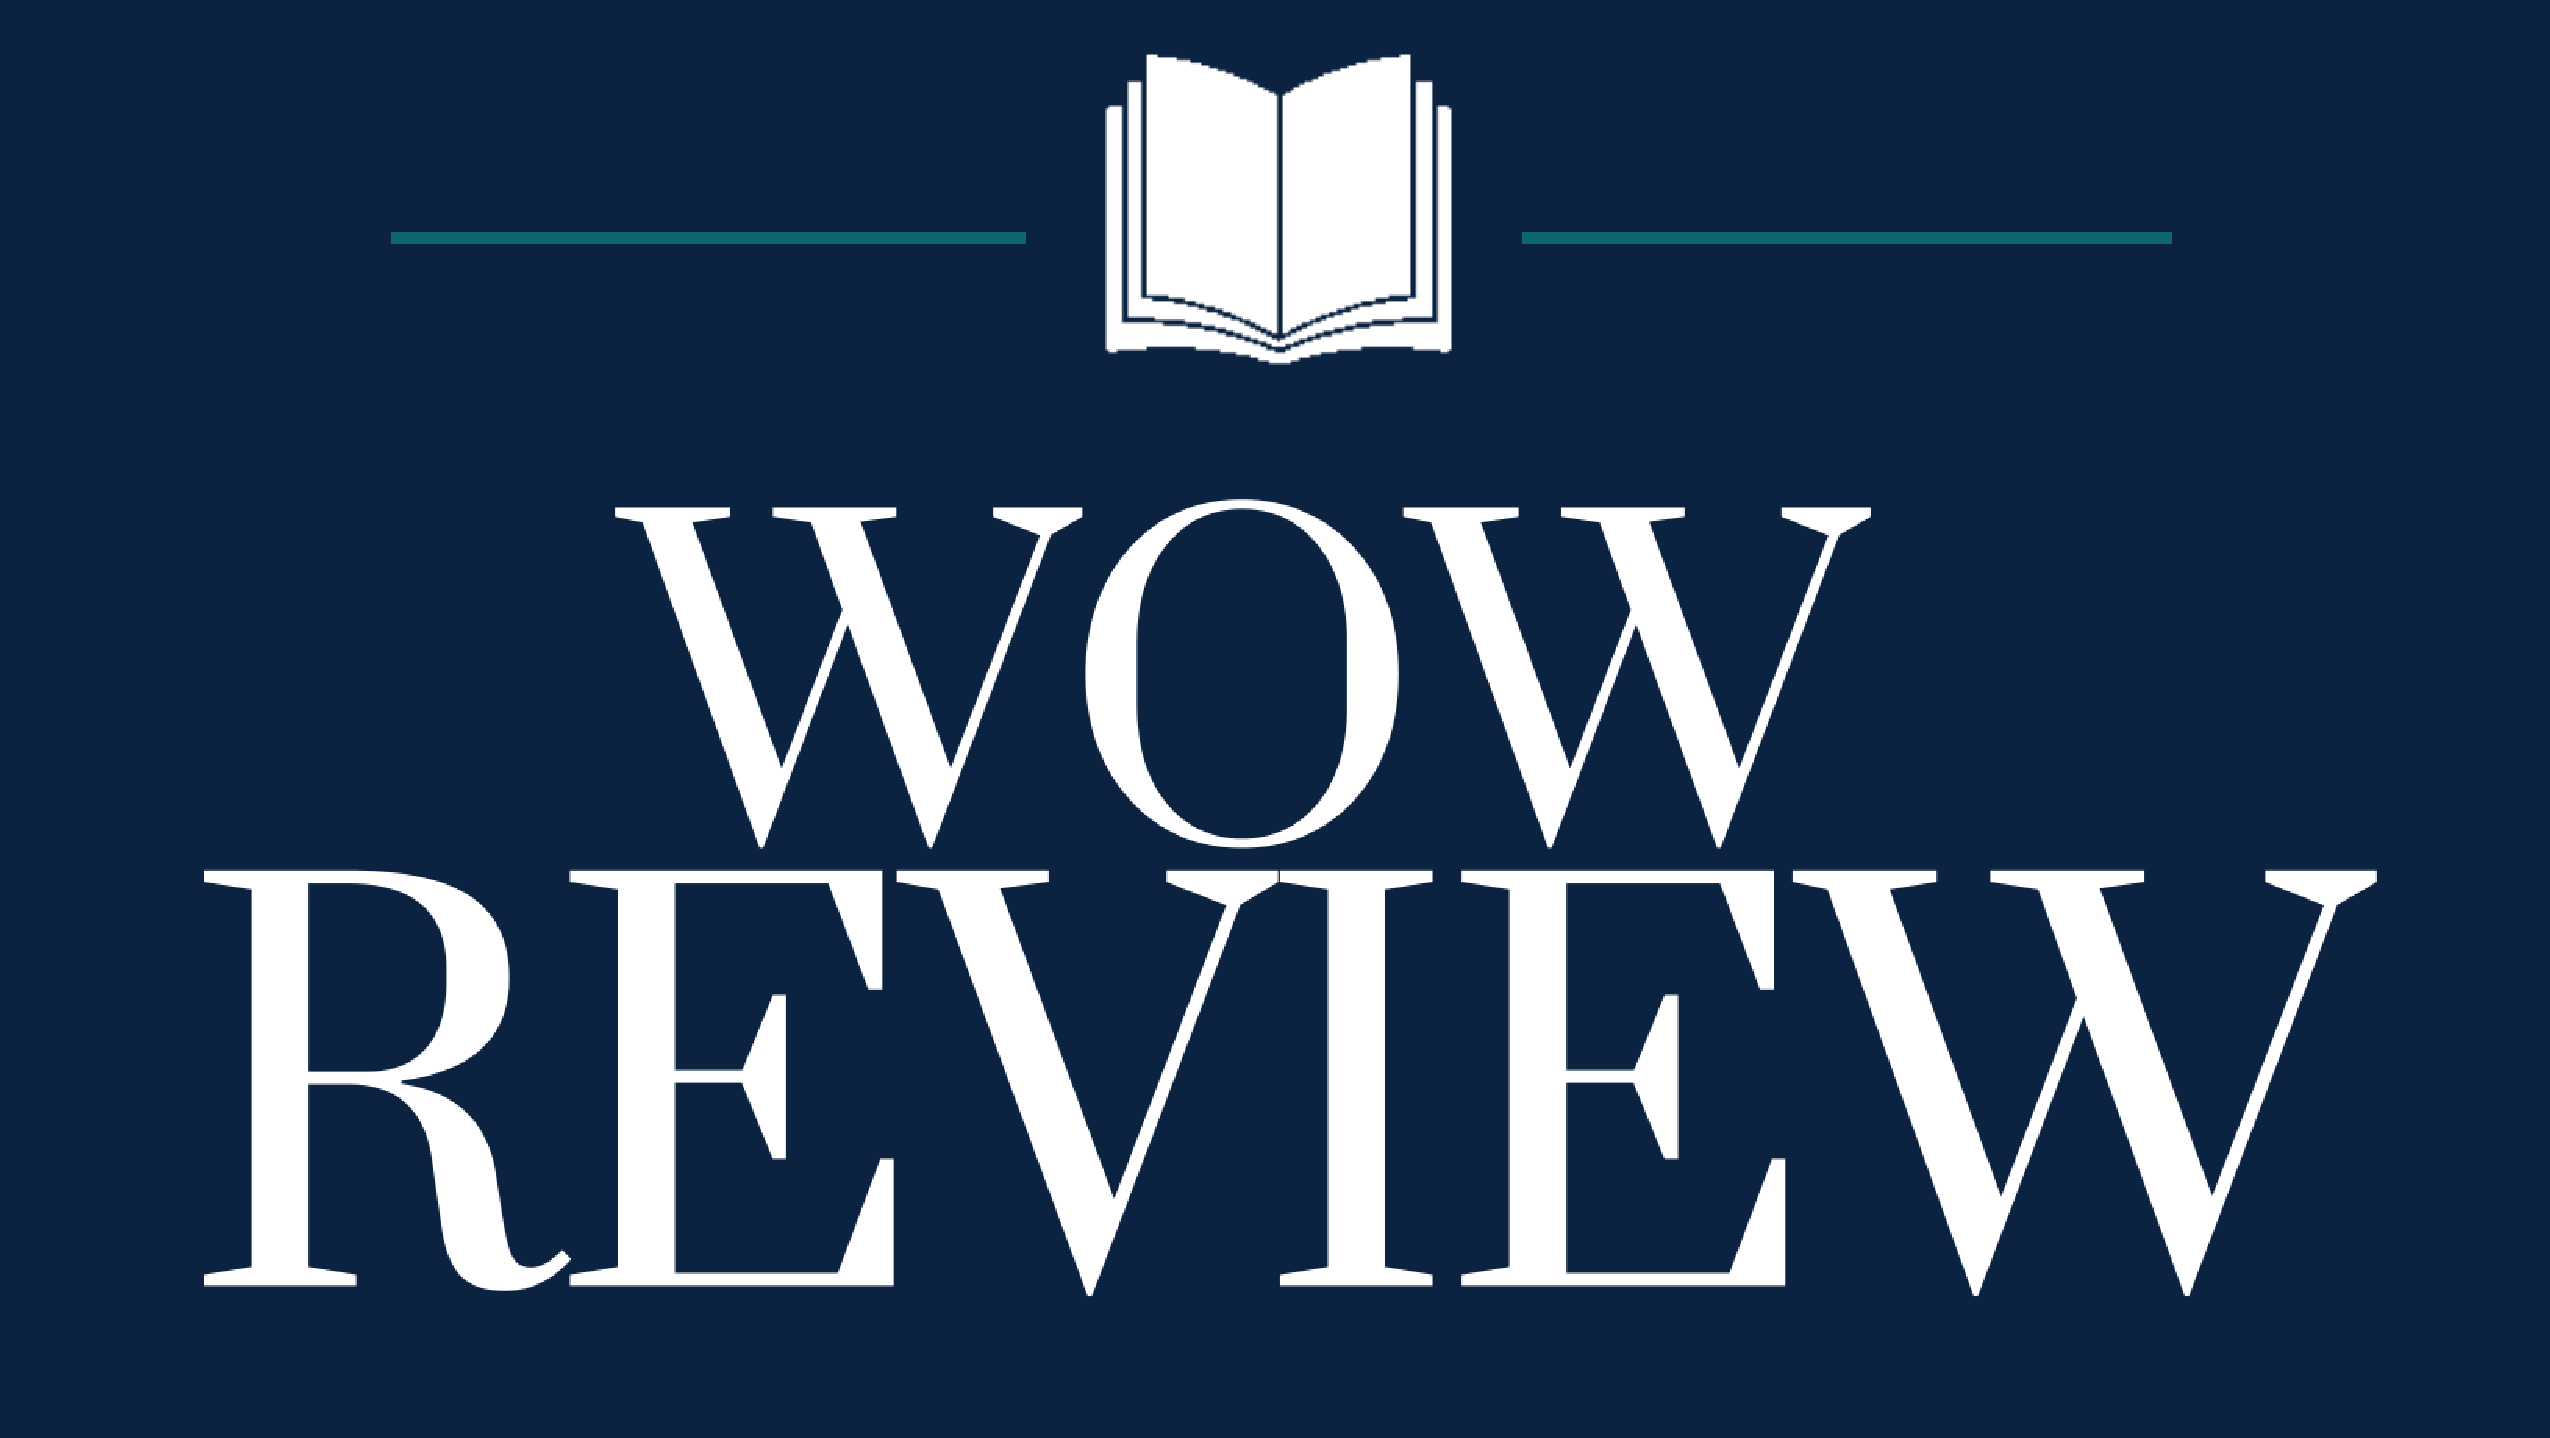 WOW Review banner, title